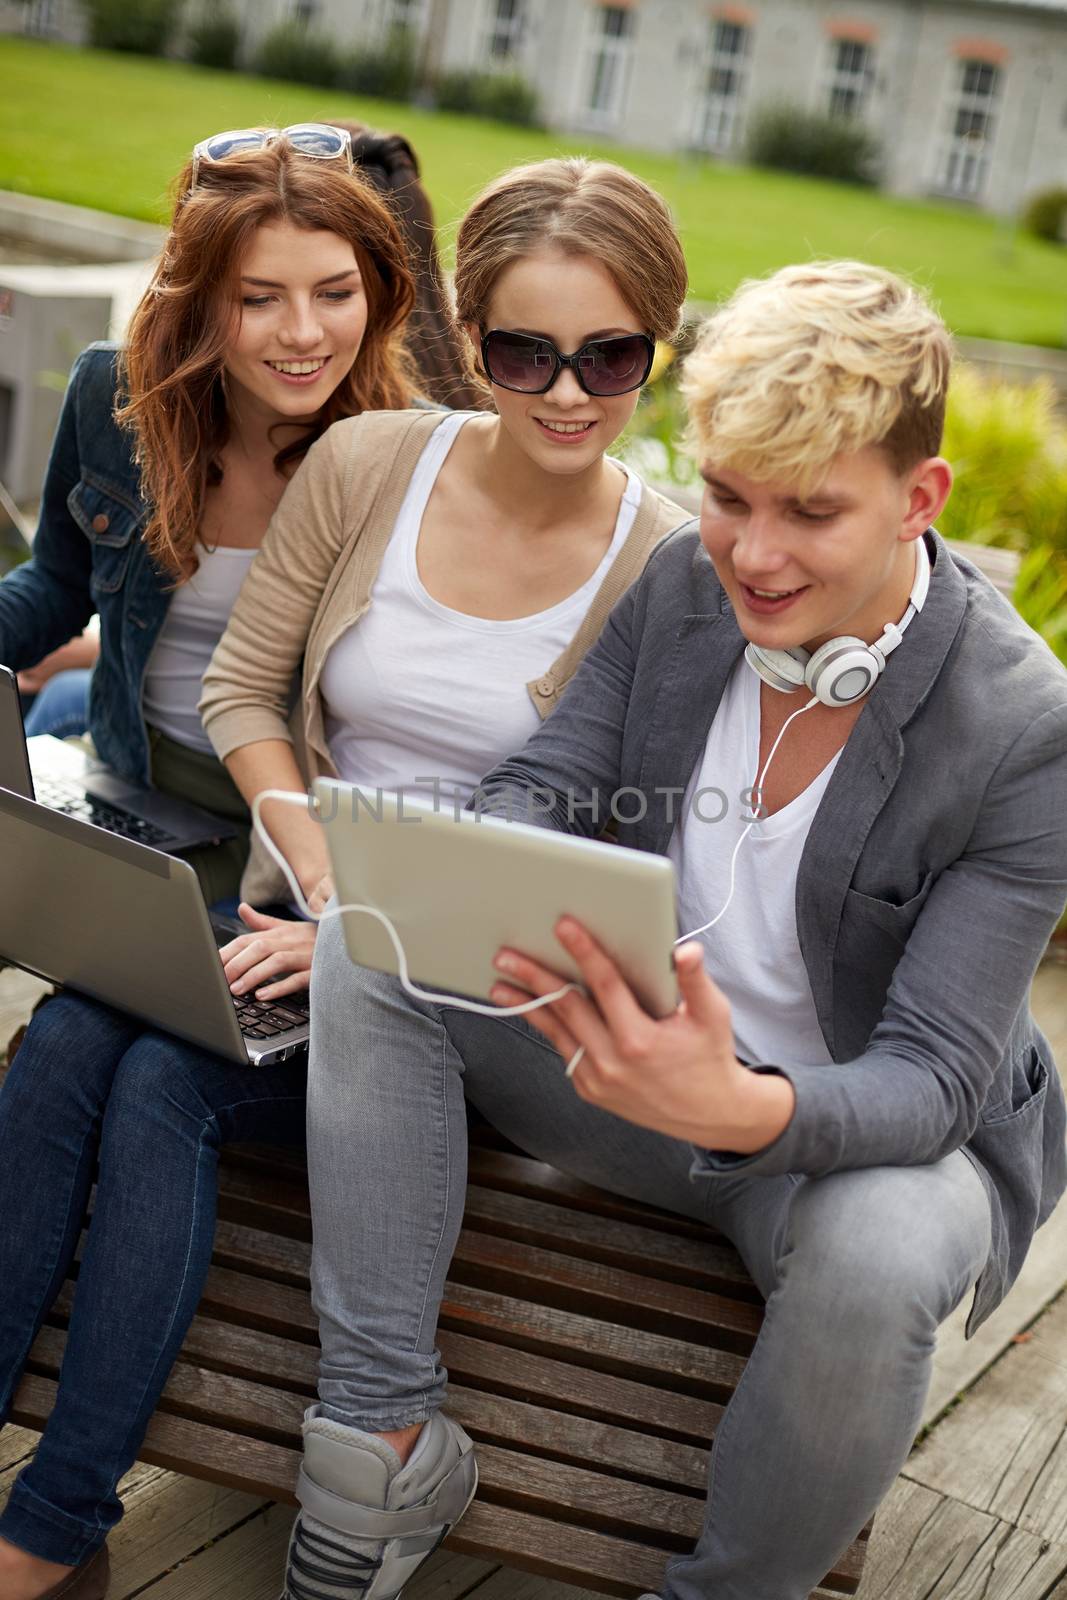 summer, education, technology and people concept - group of students or teenagers with laptop computers sitting on bench outdoors